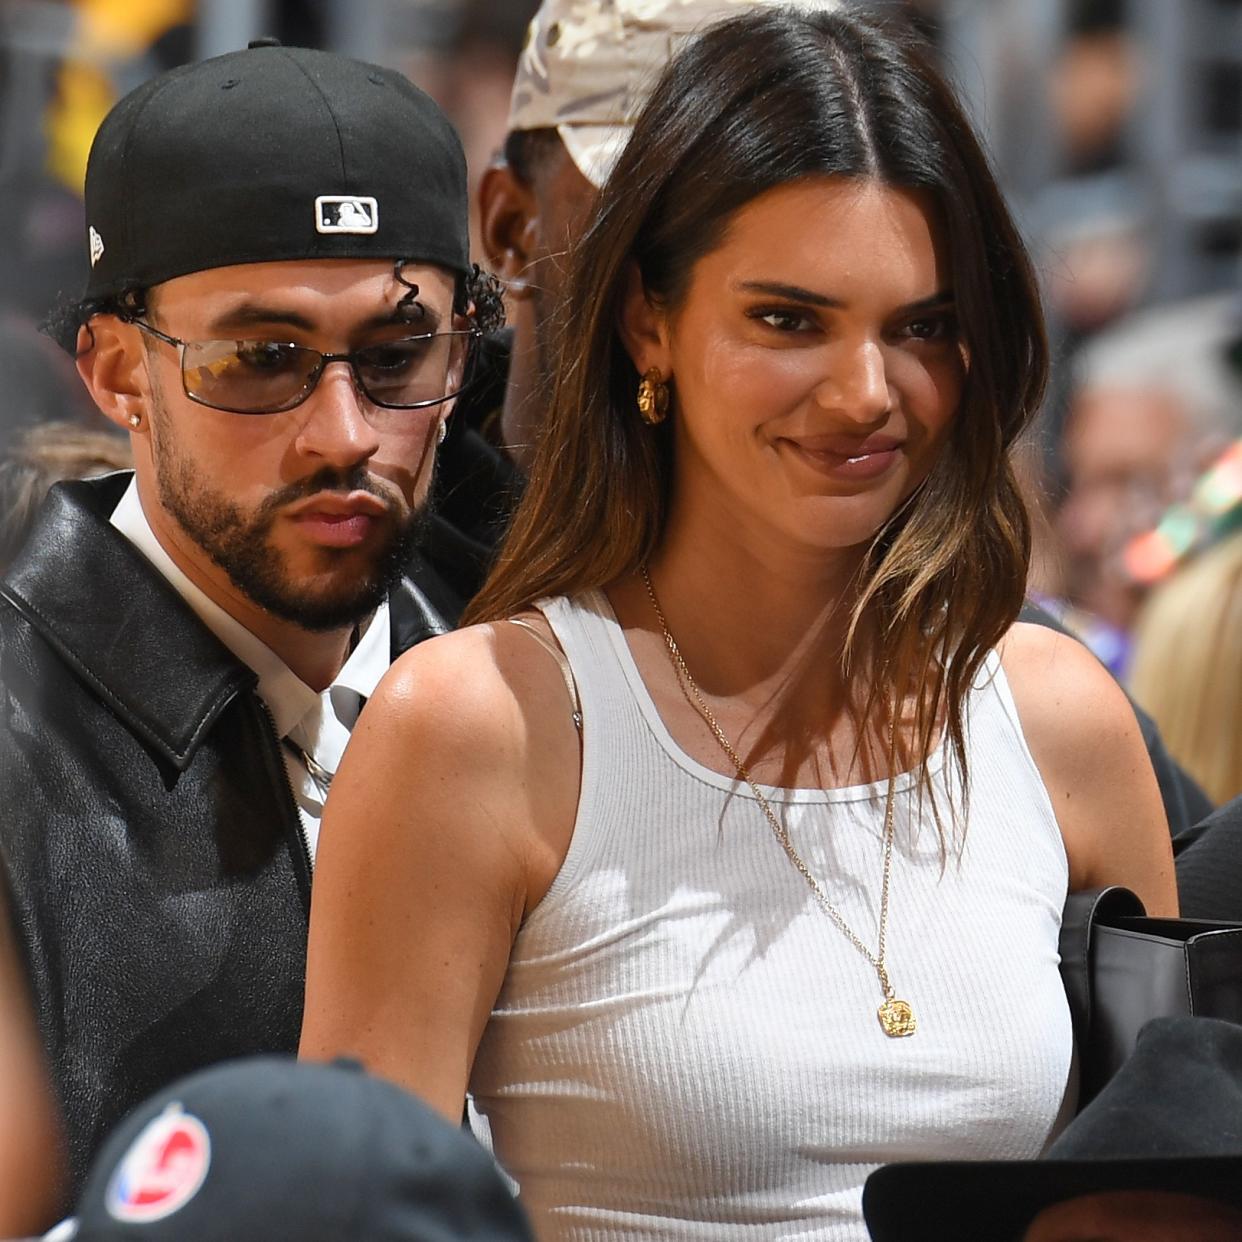  Kendall Jenner and Bad Bunny together. 